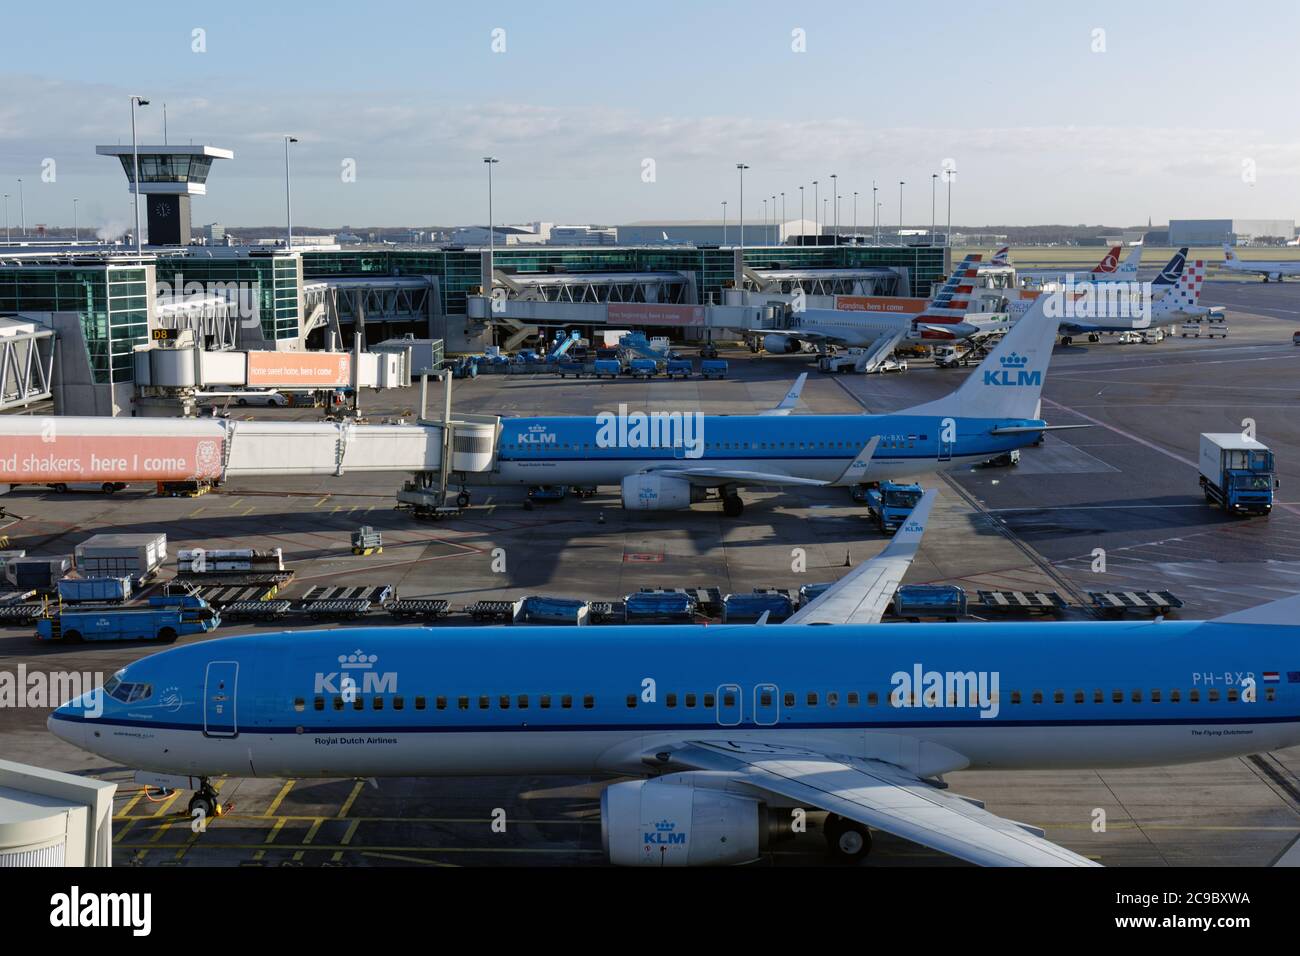 Passenger aircrafts of KLM Royal Dutch Airlines  in the airport Schiphol, Netherlans Stock Photo